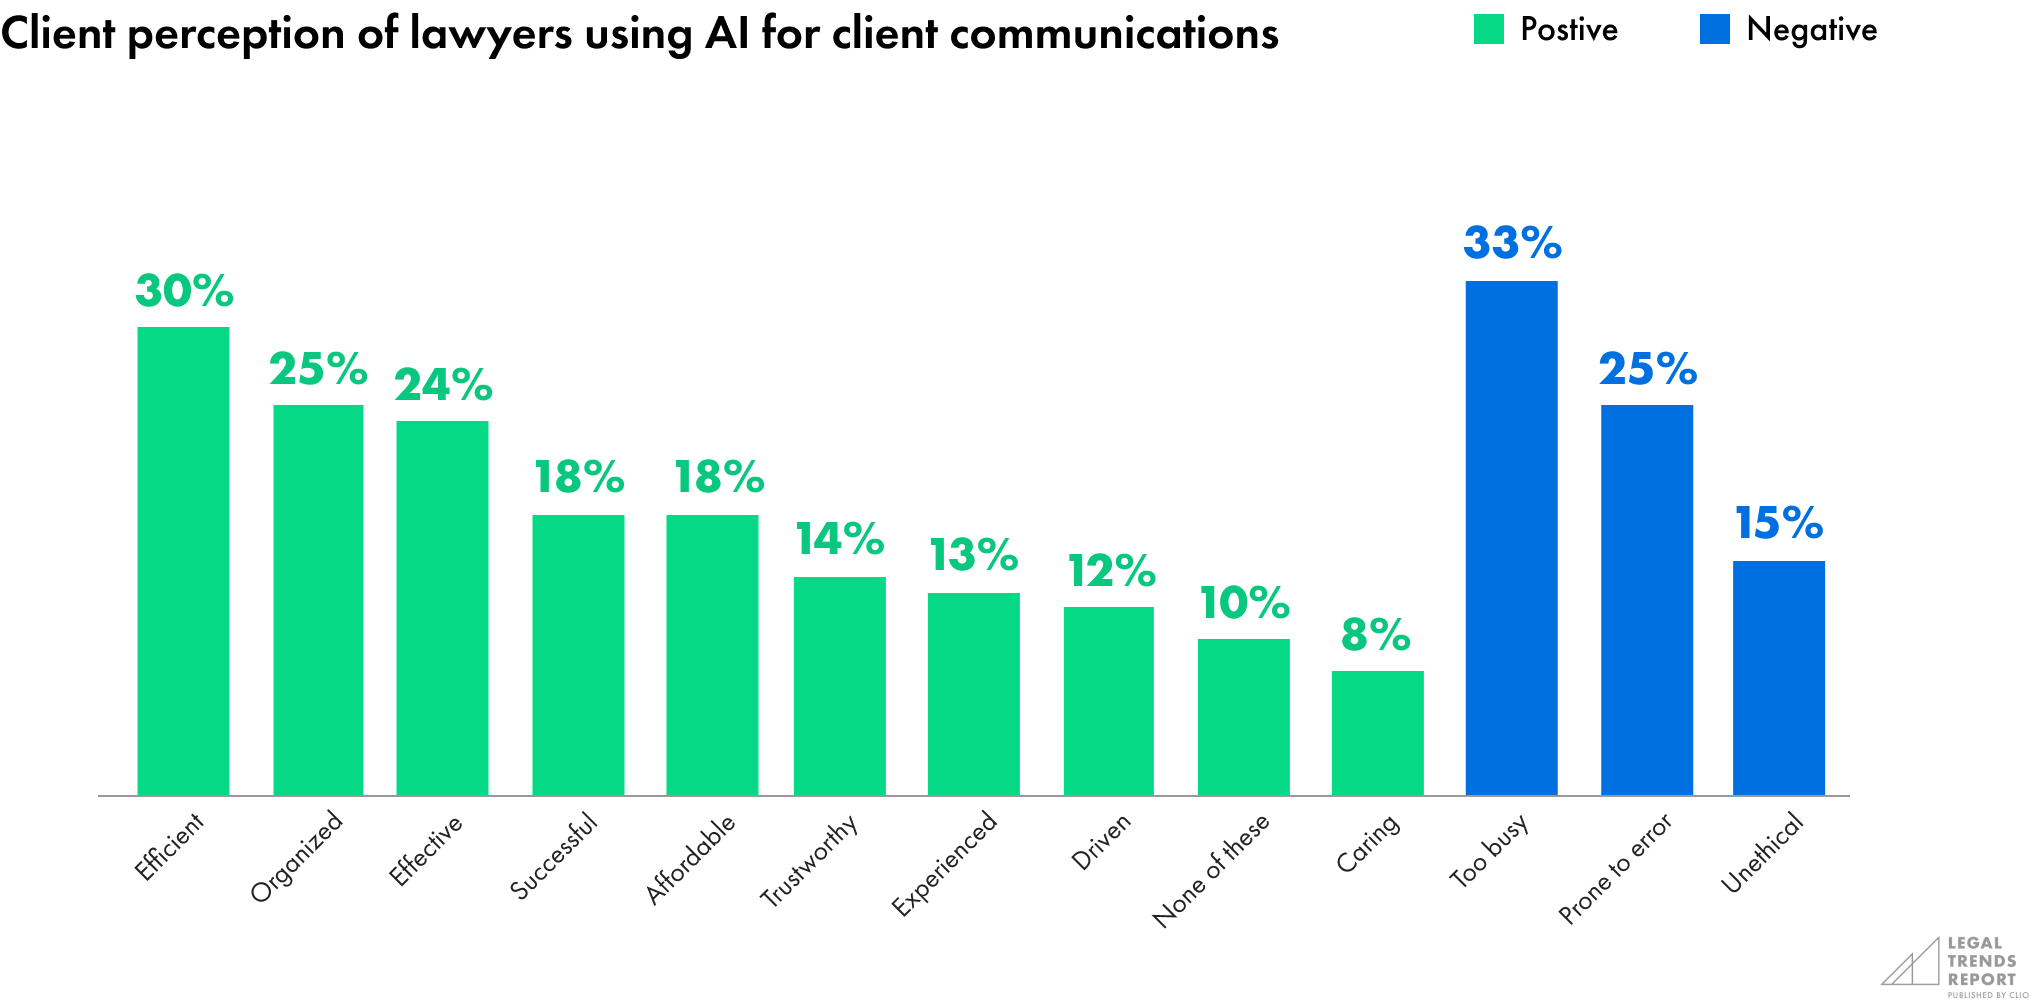 Client perception of lawyers using AI for client communications